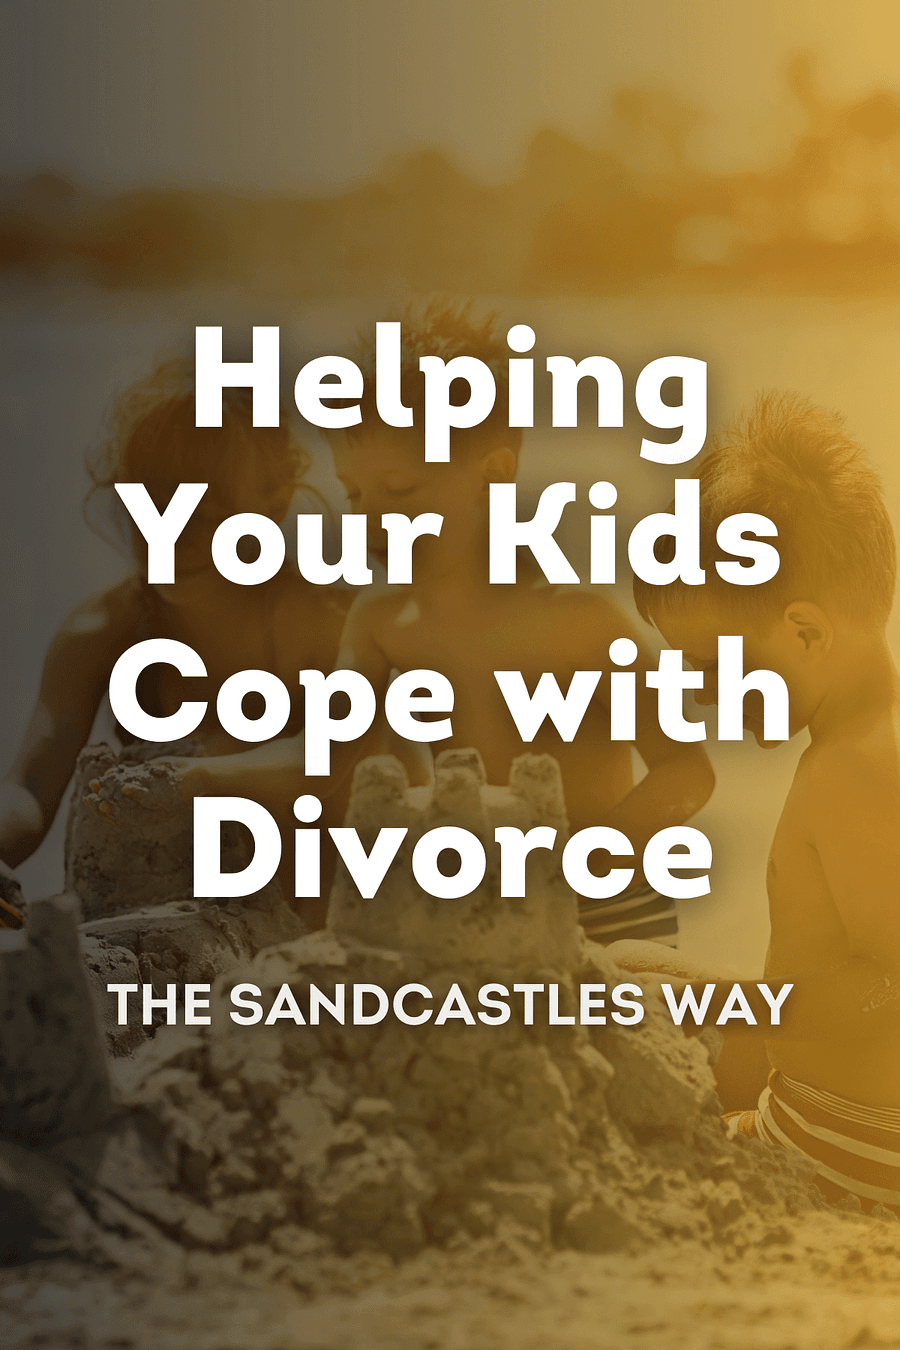 Helping Your Kids Cope with Divorce by Gary Neuman - Book Summary